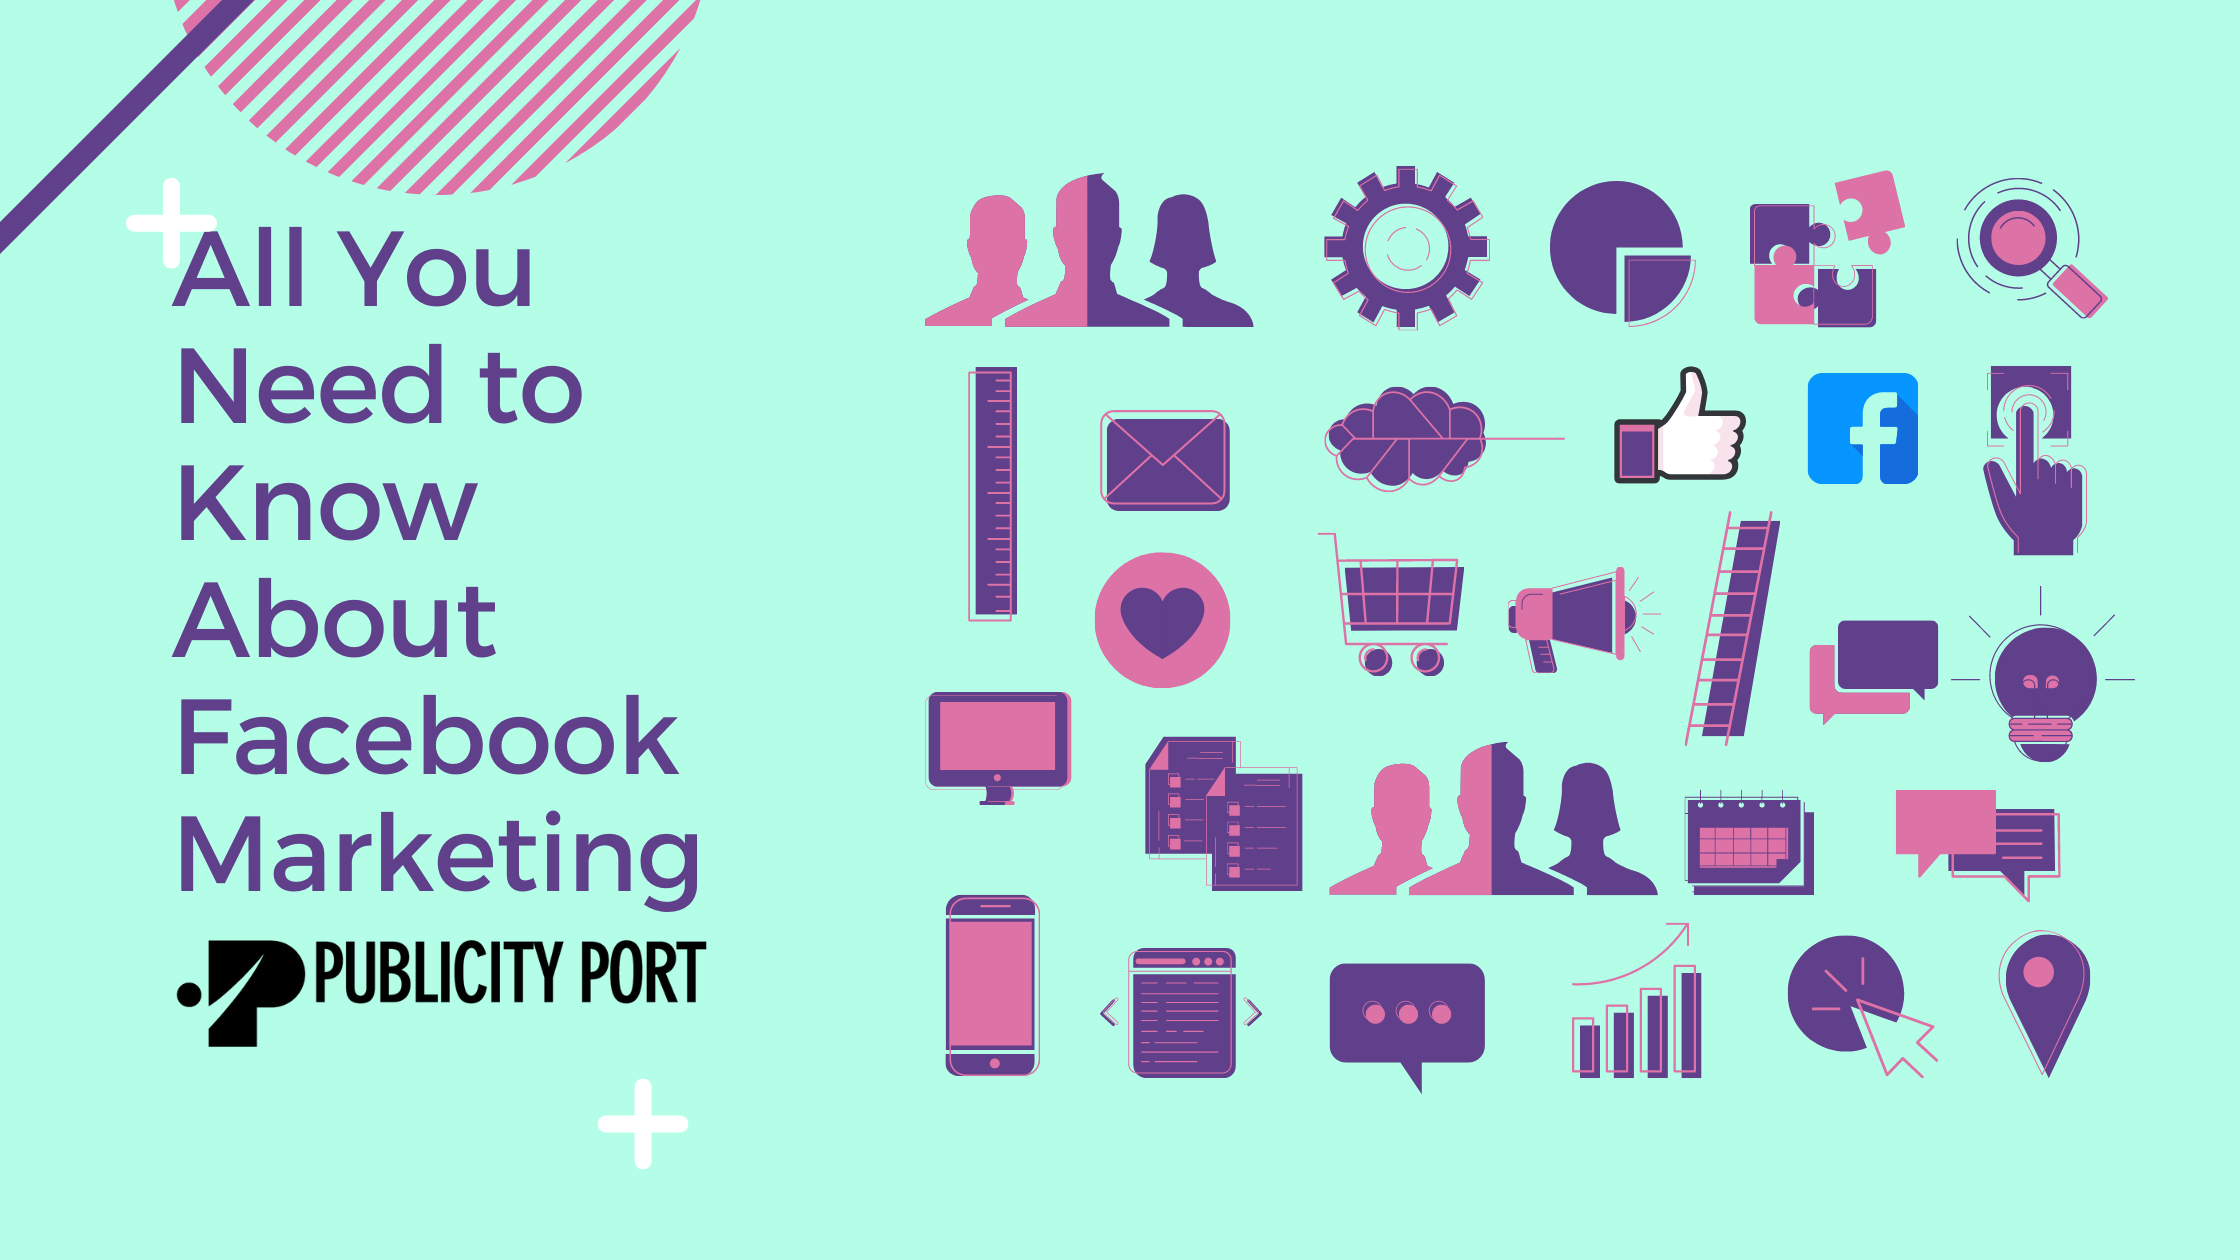 All You Need to Know About Facebook Marketing